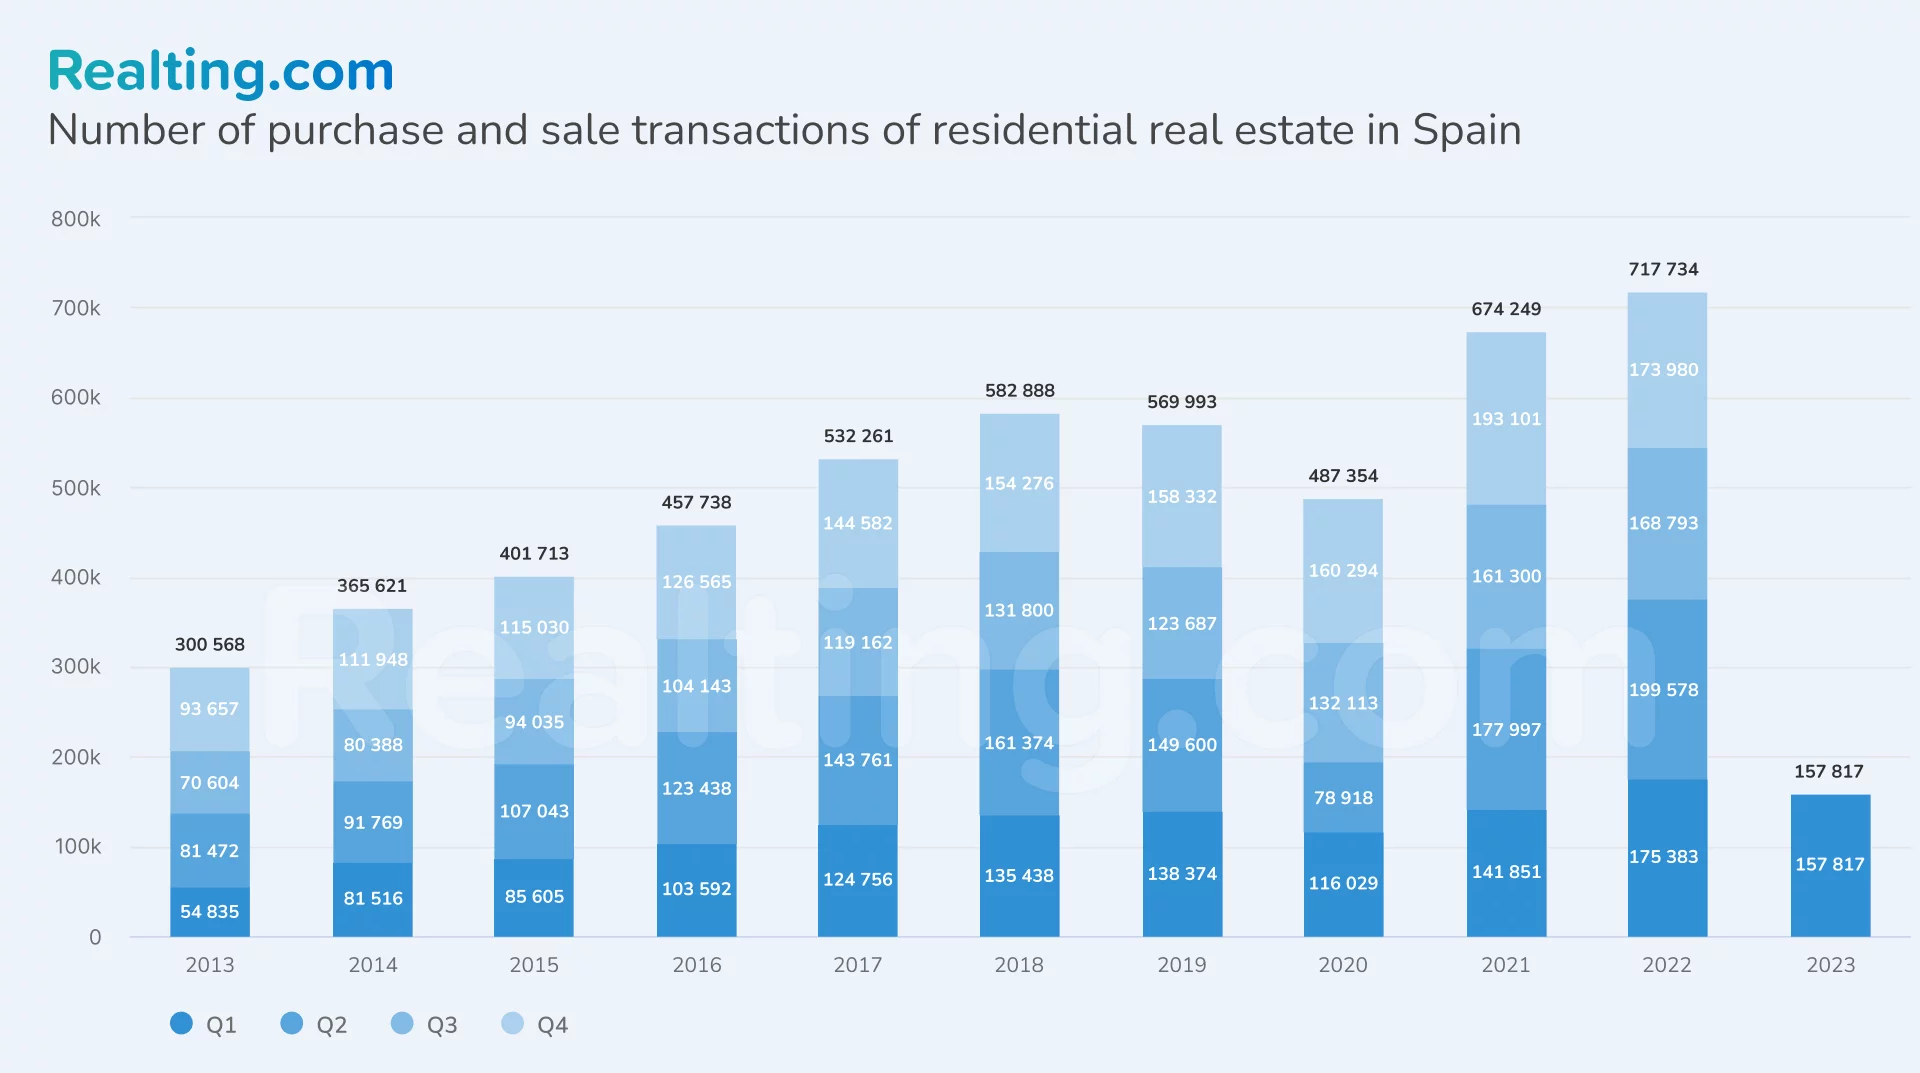 Number of purchase and sale transactions of residential real estate in Spain